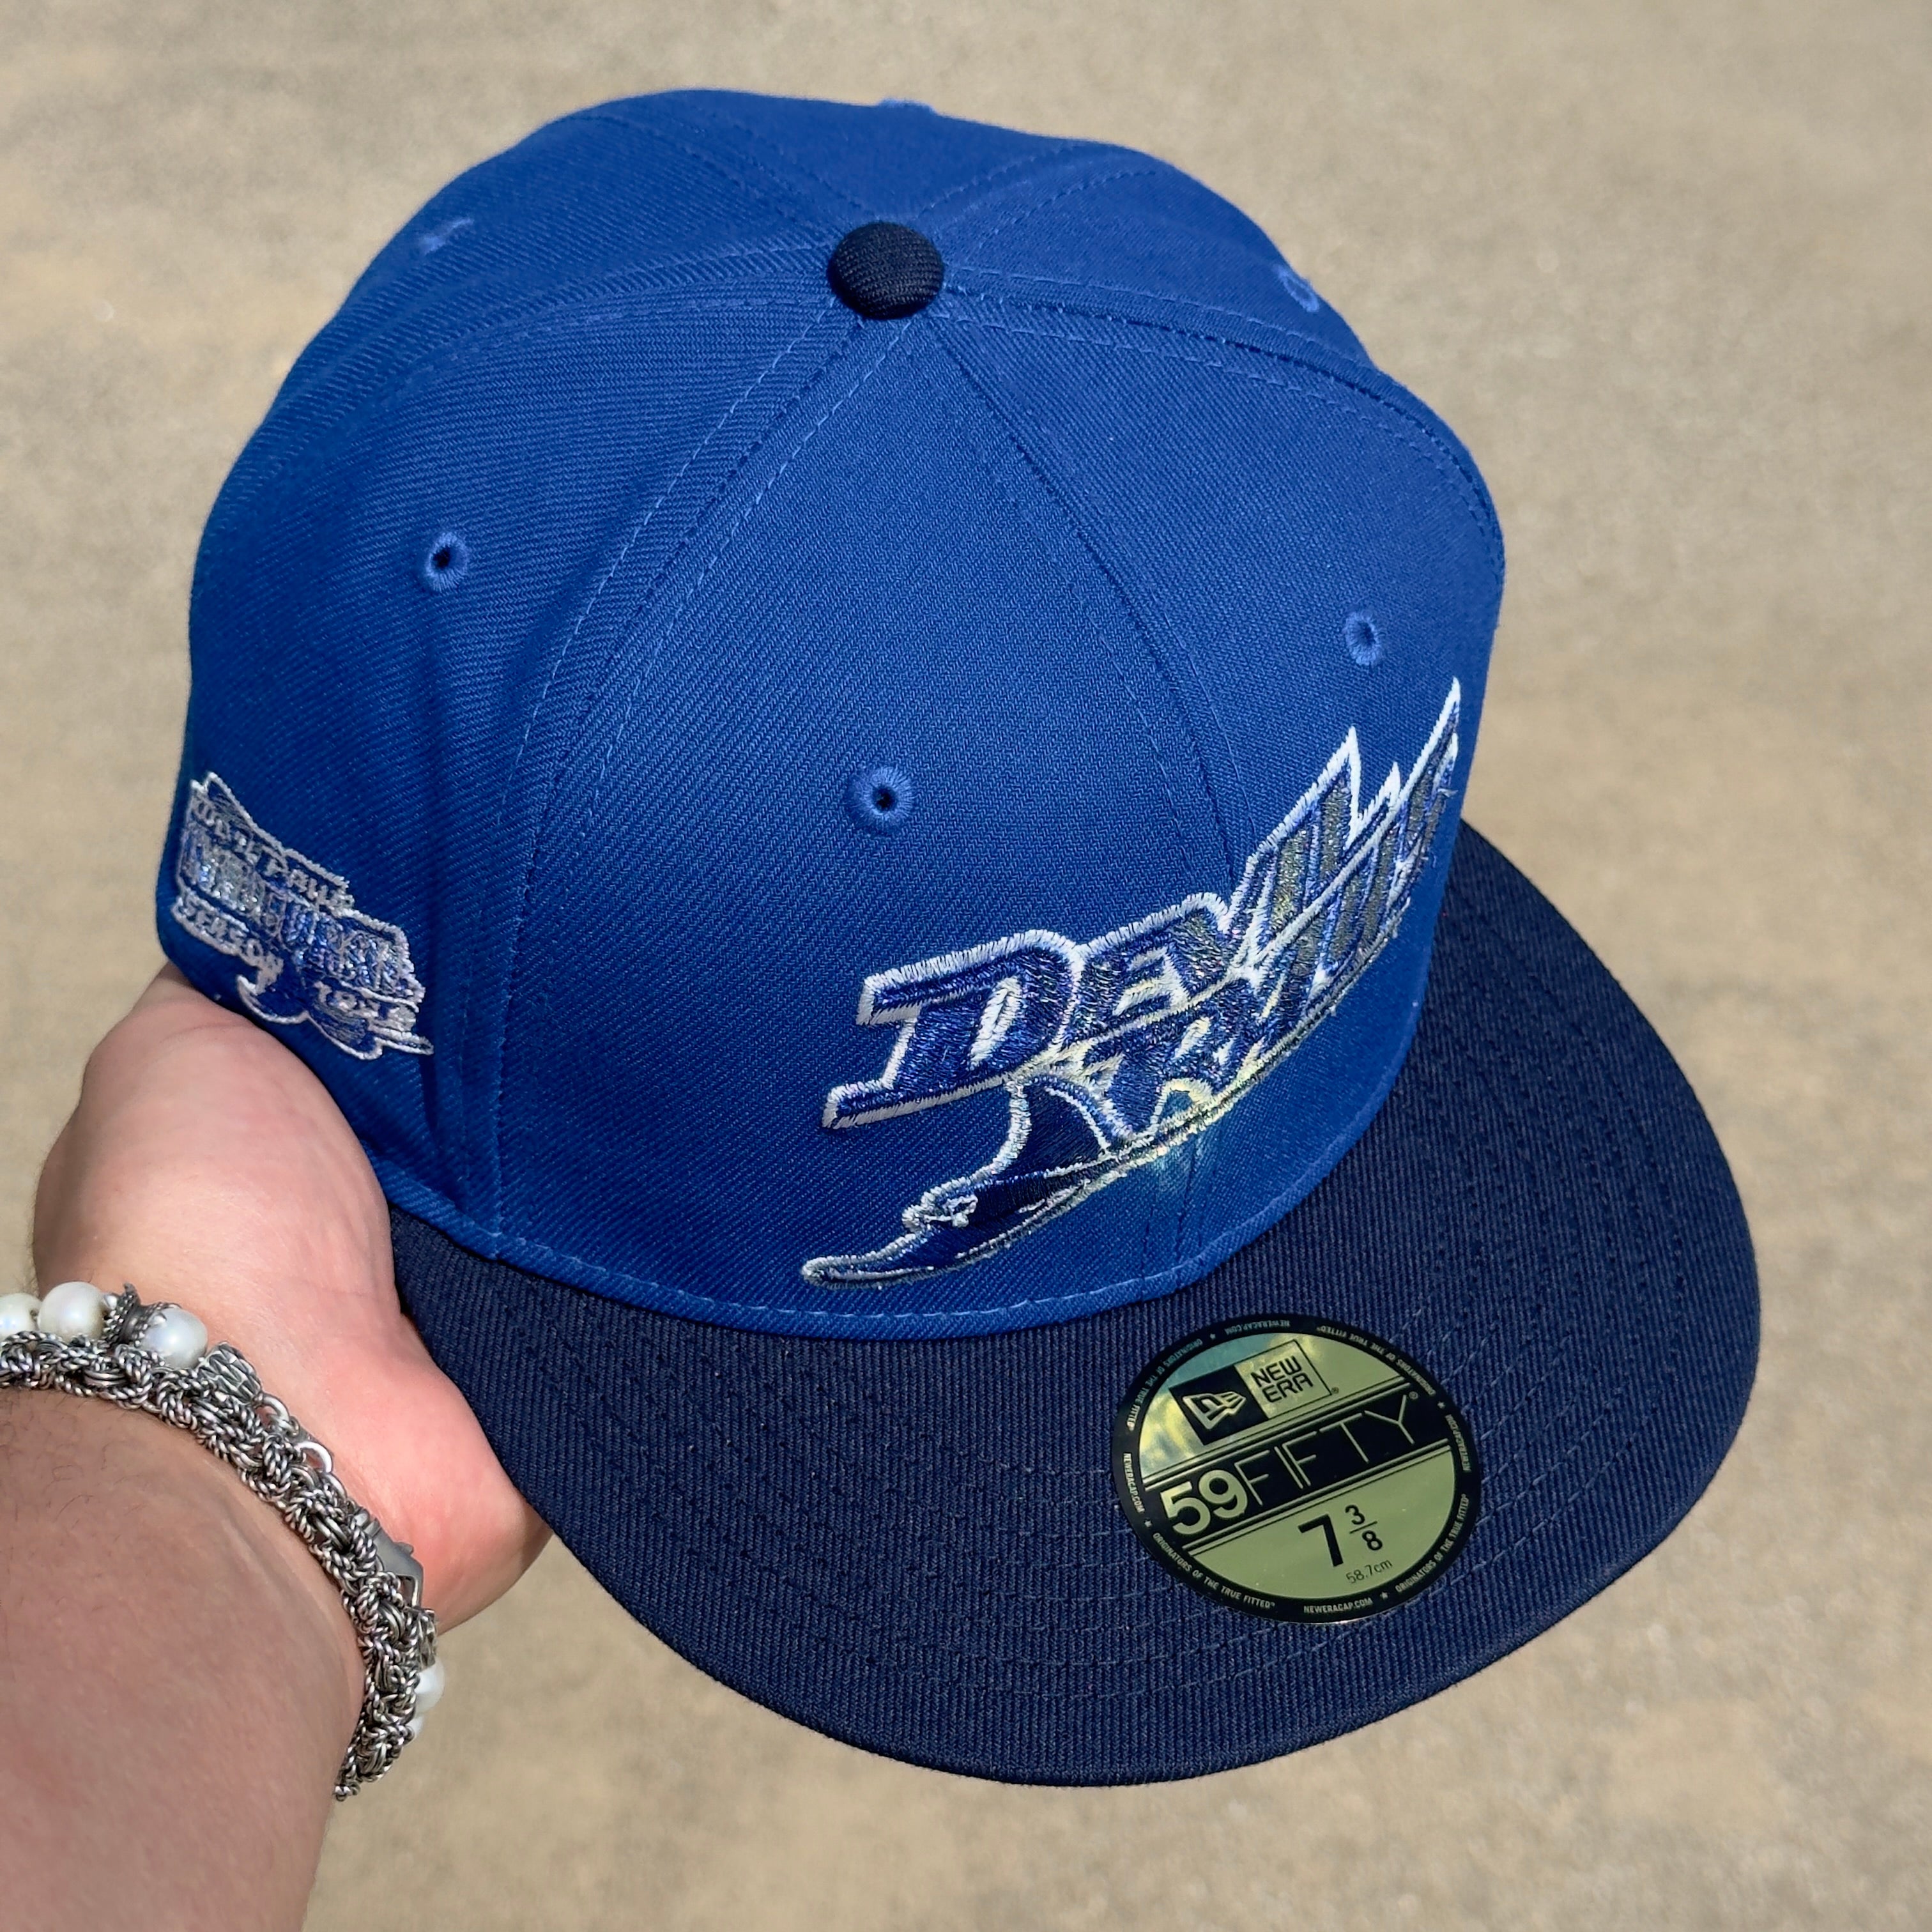 NEW Blue Tampa Devil Rays Inaugural Season 1998 59fifty New Era Fitted Hat Cap